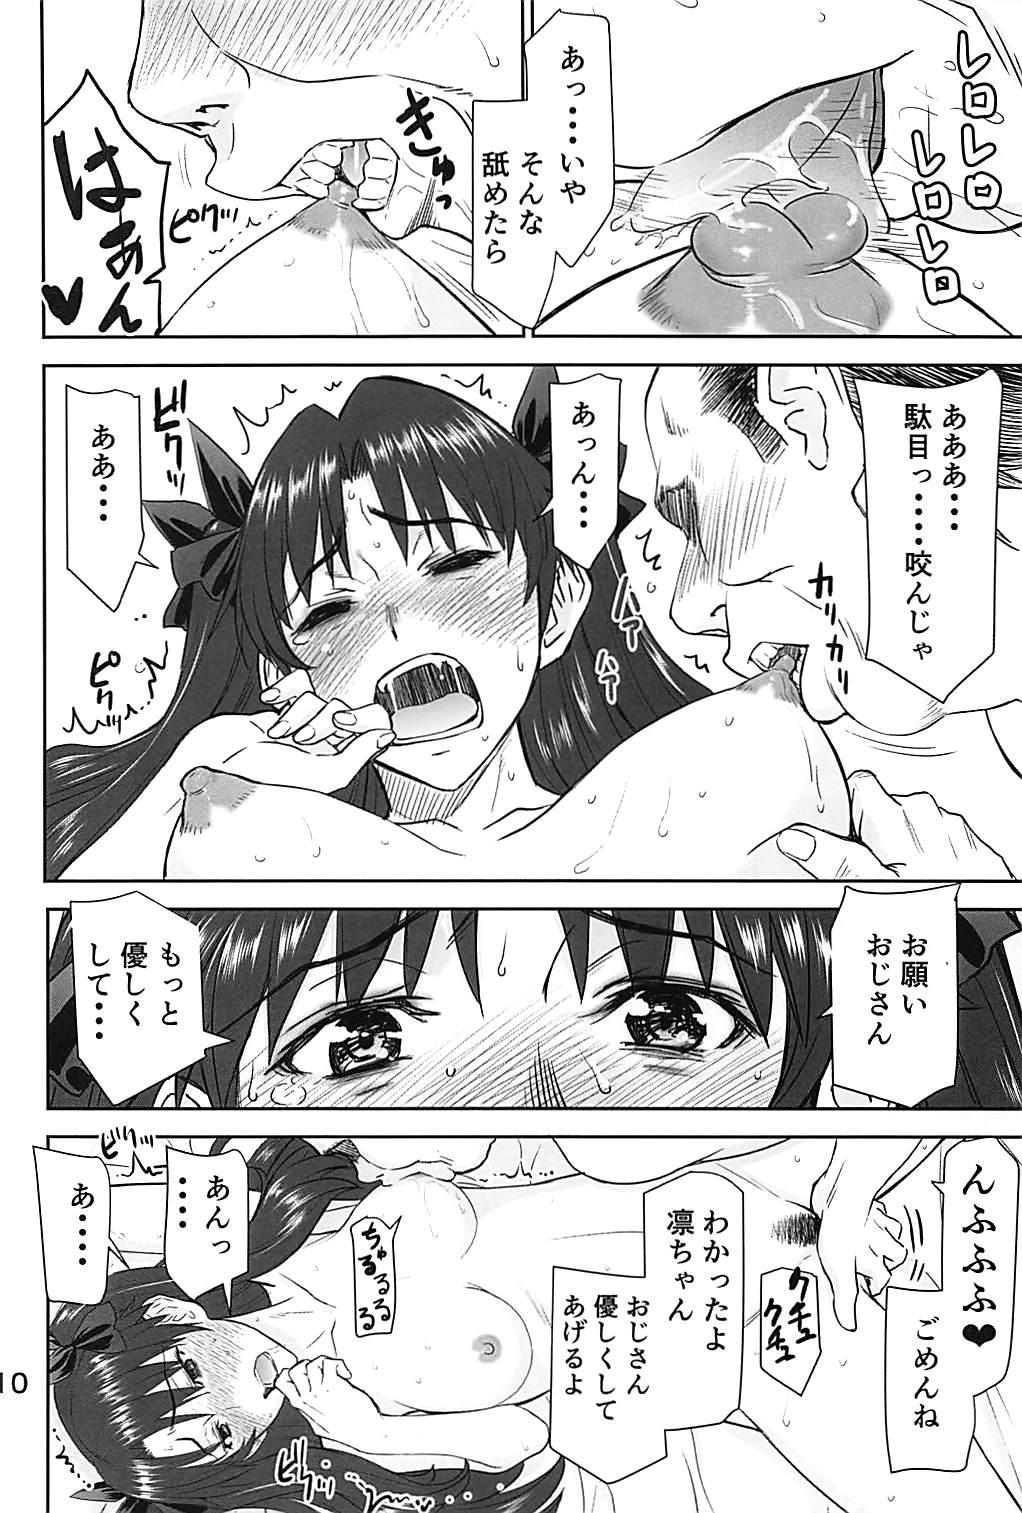 Pussy Rinkan Mahou 4 - Fate stay night Double Blowjob - Page 9